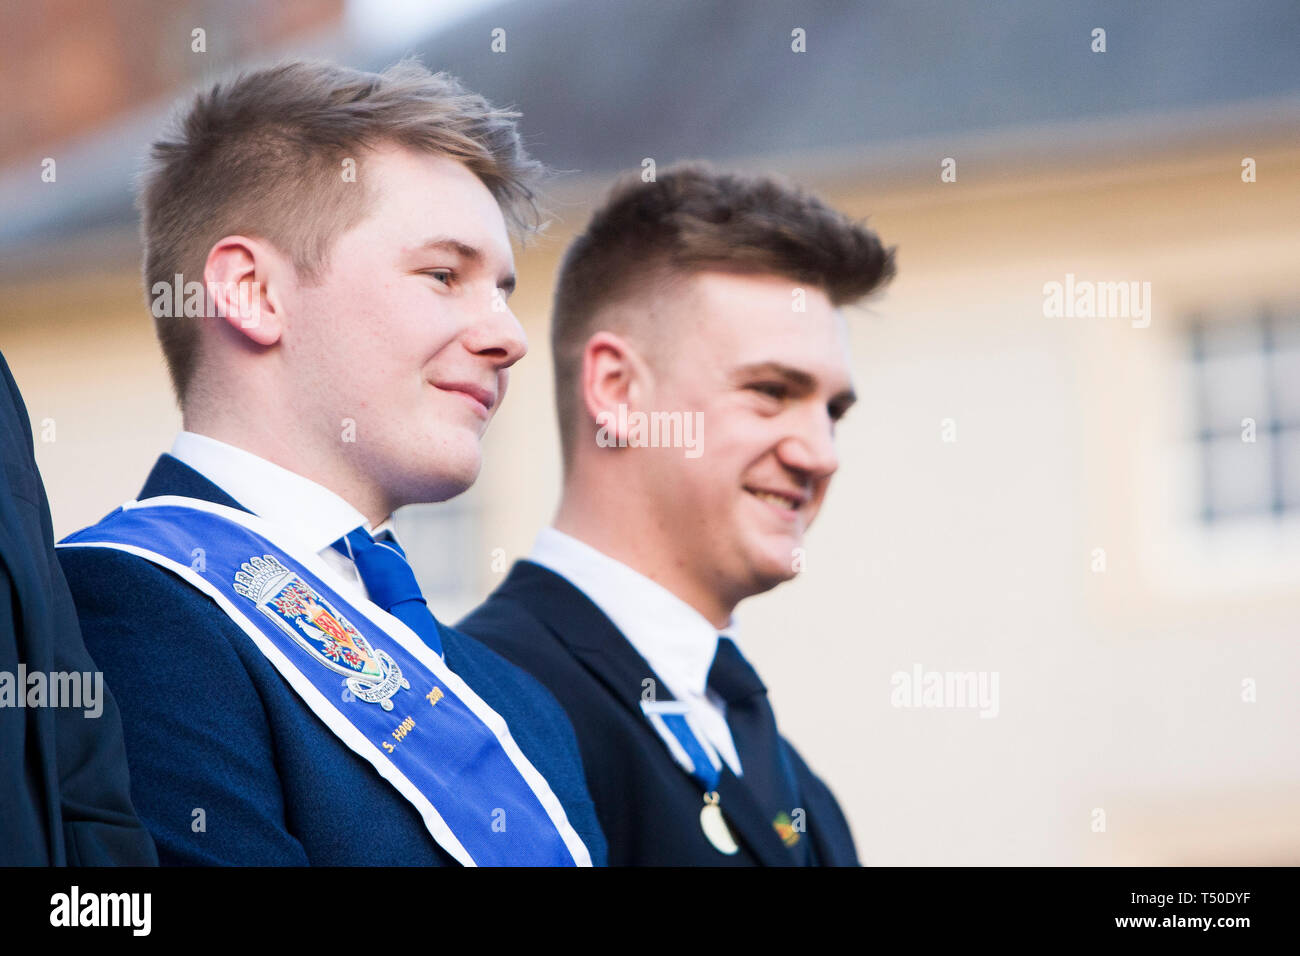 Kelso, Scottish Borders, UK. April 19 2019. The residents of Kelso gather in the town square to watch the announcement of Mark Henderson being named as the 2019 Kelso Laddie in Kelso Square on April 19 2019 in Kelso, UK. Credit: Scottish Borders Media/Alamy Live News Stock Photo